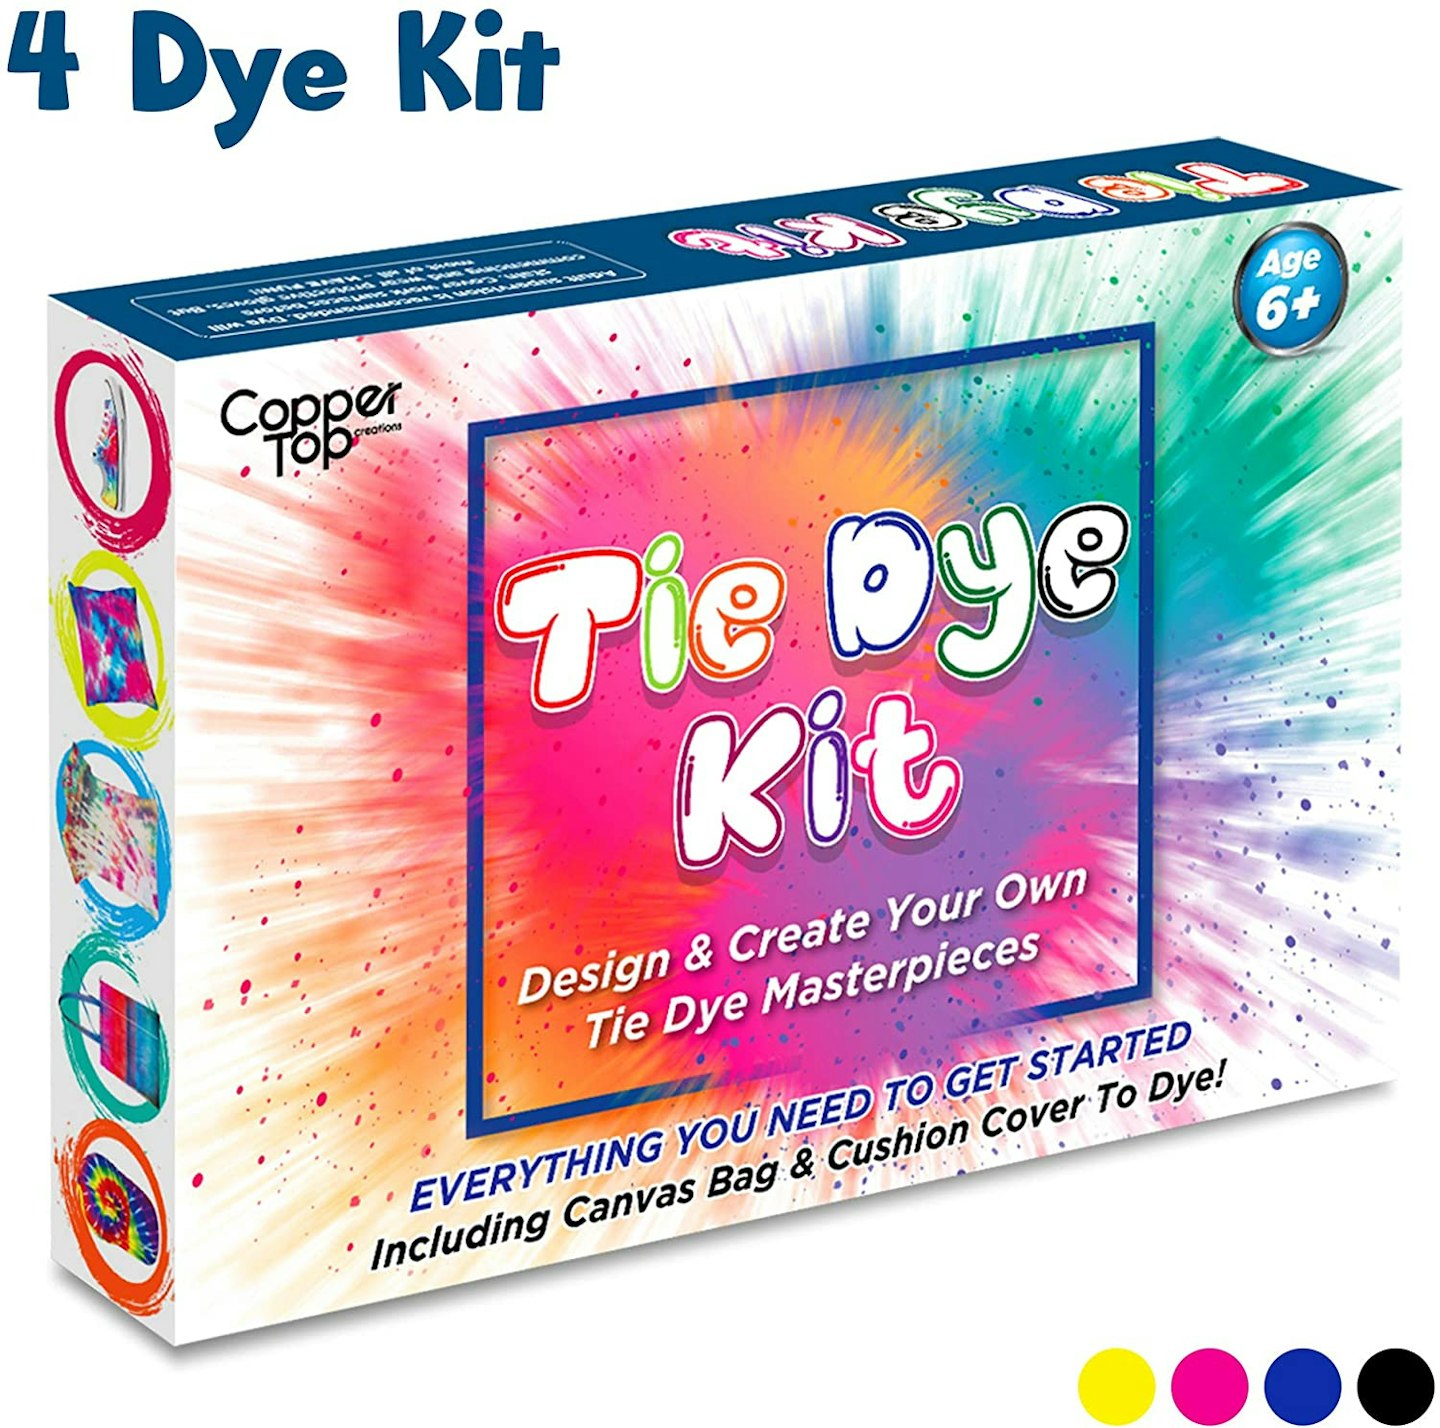 Tie Dye Kit With Plain Cushion Cover And Canvas Bag